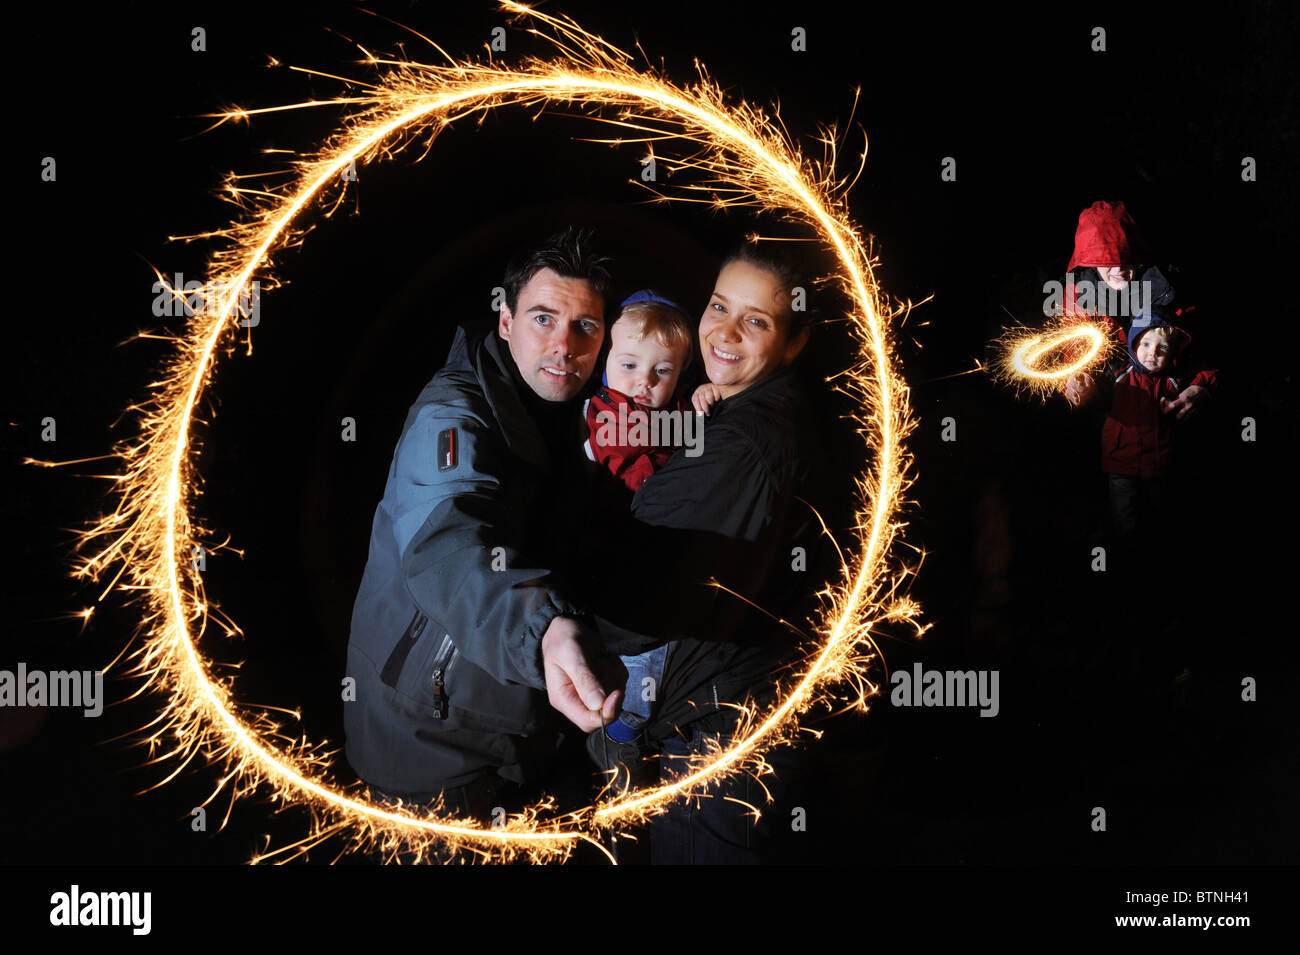 Family fireworks night Young couple and child with sparkler on bonfire night Stock Photo